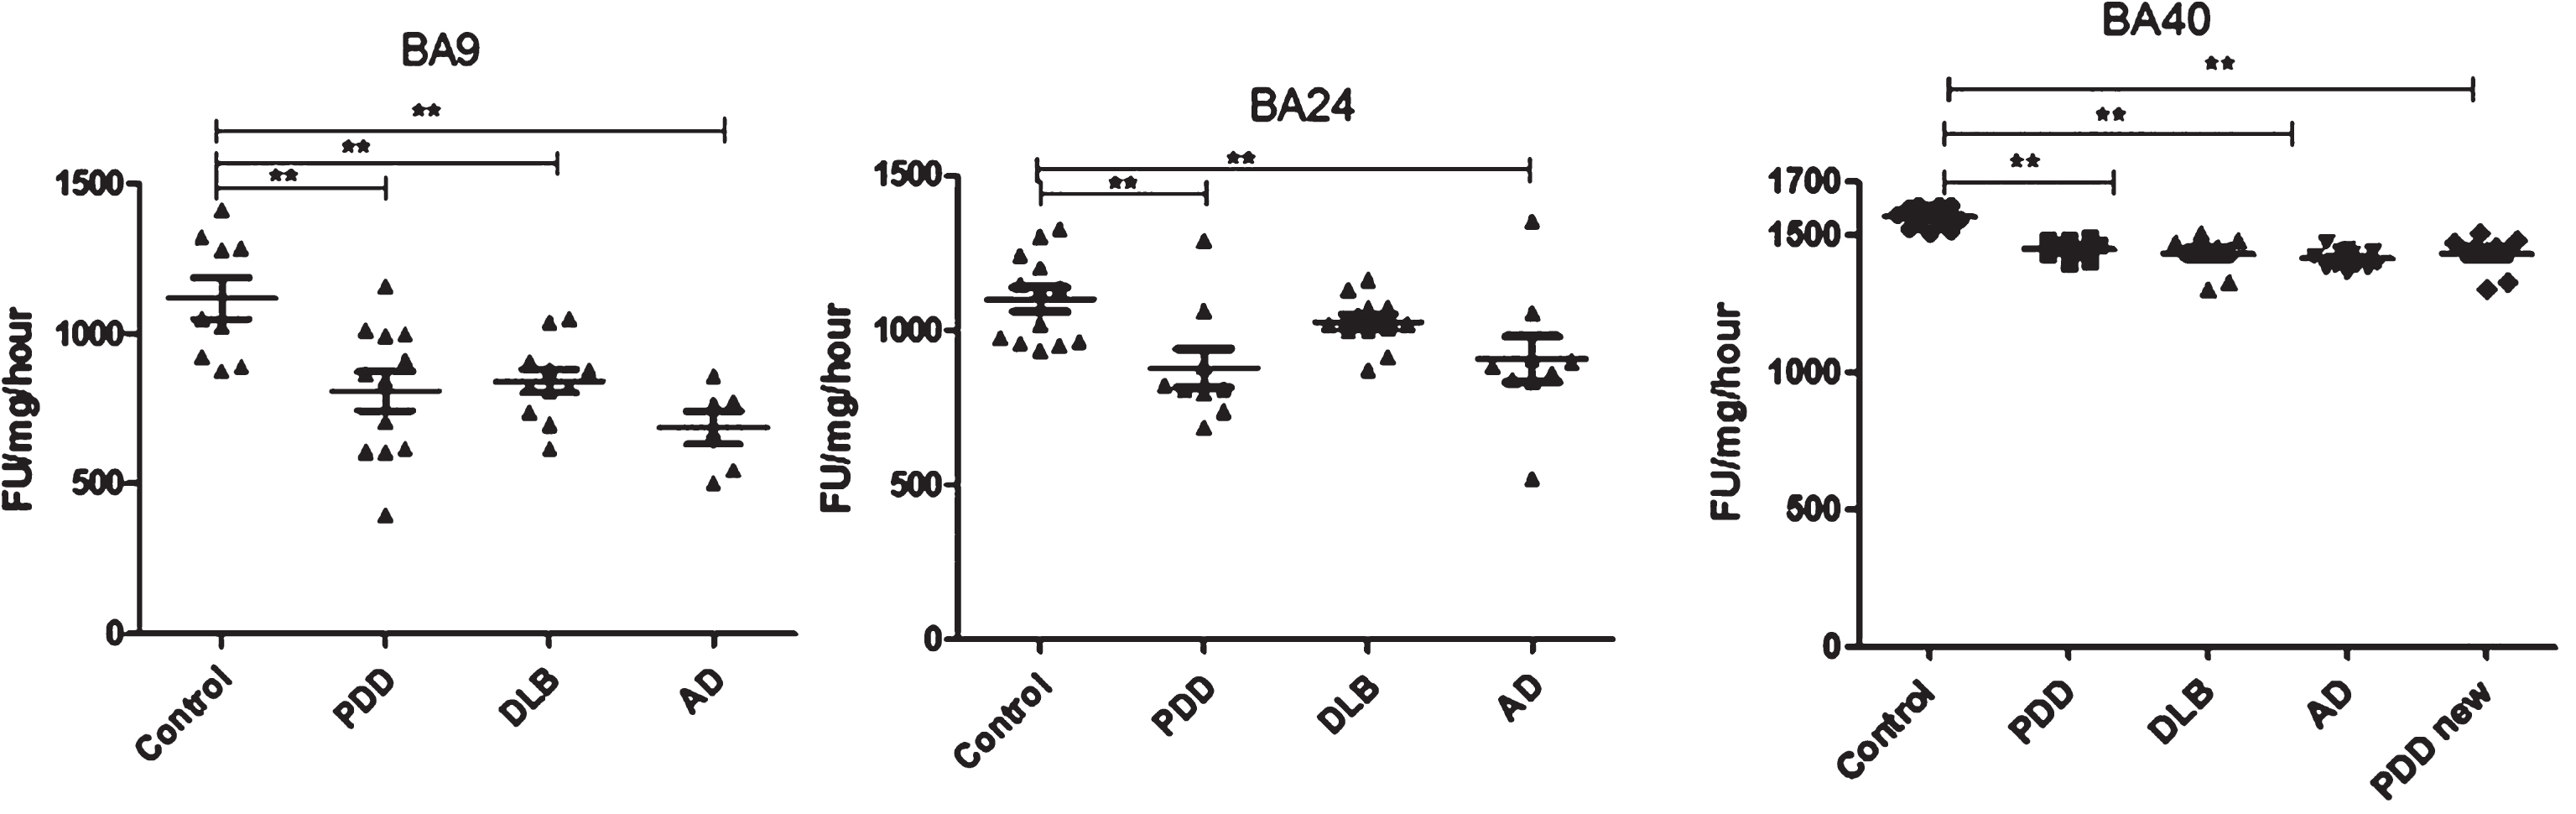 Analysis of chymotrypsin-like activities in brain homogenates from BA9, BA40, and BA24 of DLB, PDD, AD, and controls. Scatter plots are shown of chymotrypsin-like activity measurement in BA9, BA40, and BA24 homogenates from DLB, PDD, AD, and normal control samples using the fluorogenic substrate assay. Activities are expressed as fluorescence units (FU)/mg protein/hour. BA9; the activities’ values for the control group were significantly higher than the PDD (p = 0.004, n = 12), DLB (p = 0.013, n = 11) and AD (p = 0.001, n = 6) groups. The ANOVA values for chymotrypsin-like activity measurement in BA9 are: F = 7.897, d.f. = 3 and 34, p = 0.001) BA40; the activities’ values for the control group (n = 13) were significantly higher than the PDD (p = 0.001, n = 10), DLB (p = 0.001, n = 9), and AD (p = 0.001, n = 12) groups. The ANOVA for chymotrypsin-like activity measurement in BA40 (one-way ANOVA, F = 30.033, d.f. = 3 and 40, p = 0.001; Bonferroni post hoc test) BA24; there was a significant difference between the PDD (p = 0.015, n = 9) and AD (p = 0.044, n = 9) groups compared with the control (n = 13) (one-way ANOVA, F = 4.664, d.f. = 3 and 39, p = 0.007; Bonferroni post hoc test). (**p < 0.01).